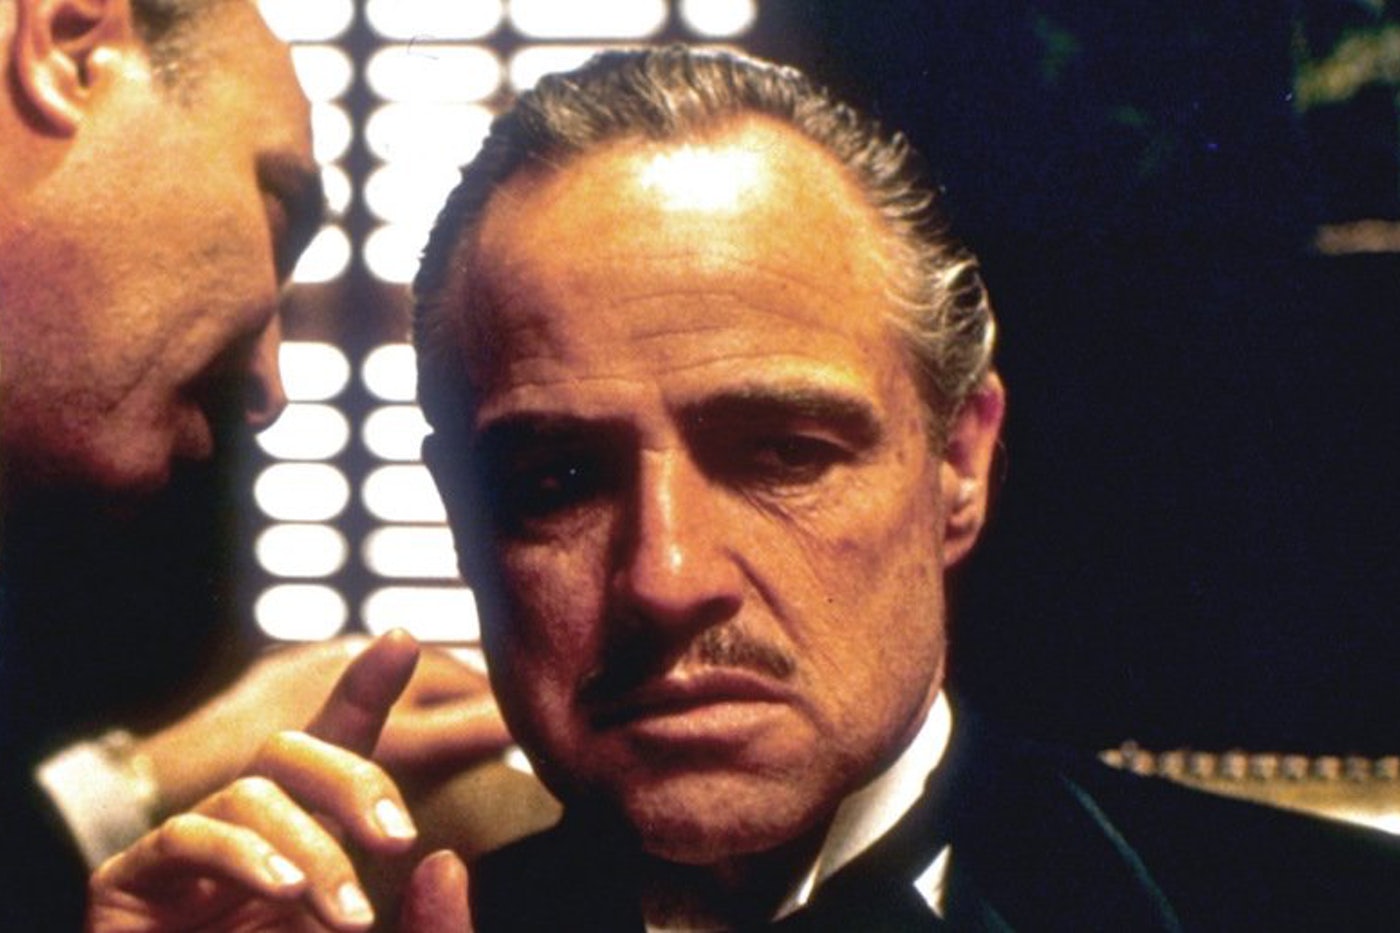 Francis Ford Coppola hints at Godfather sequels, with a condition